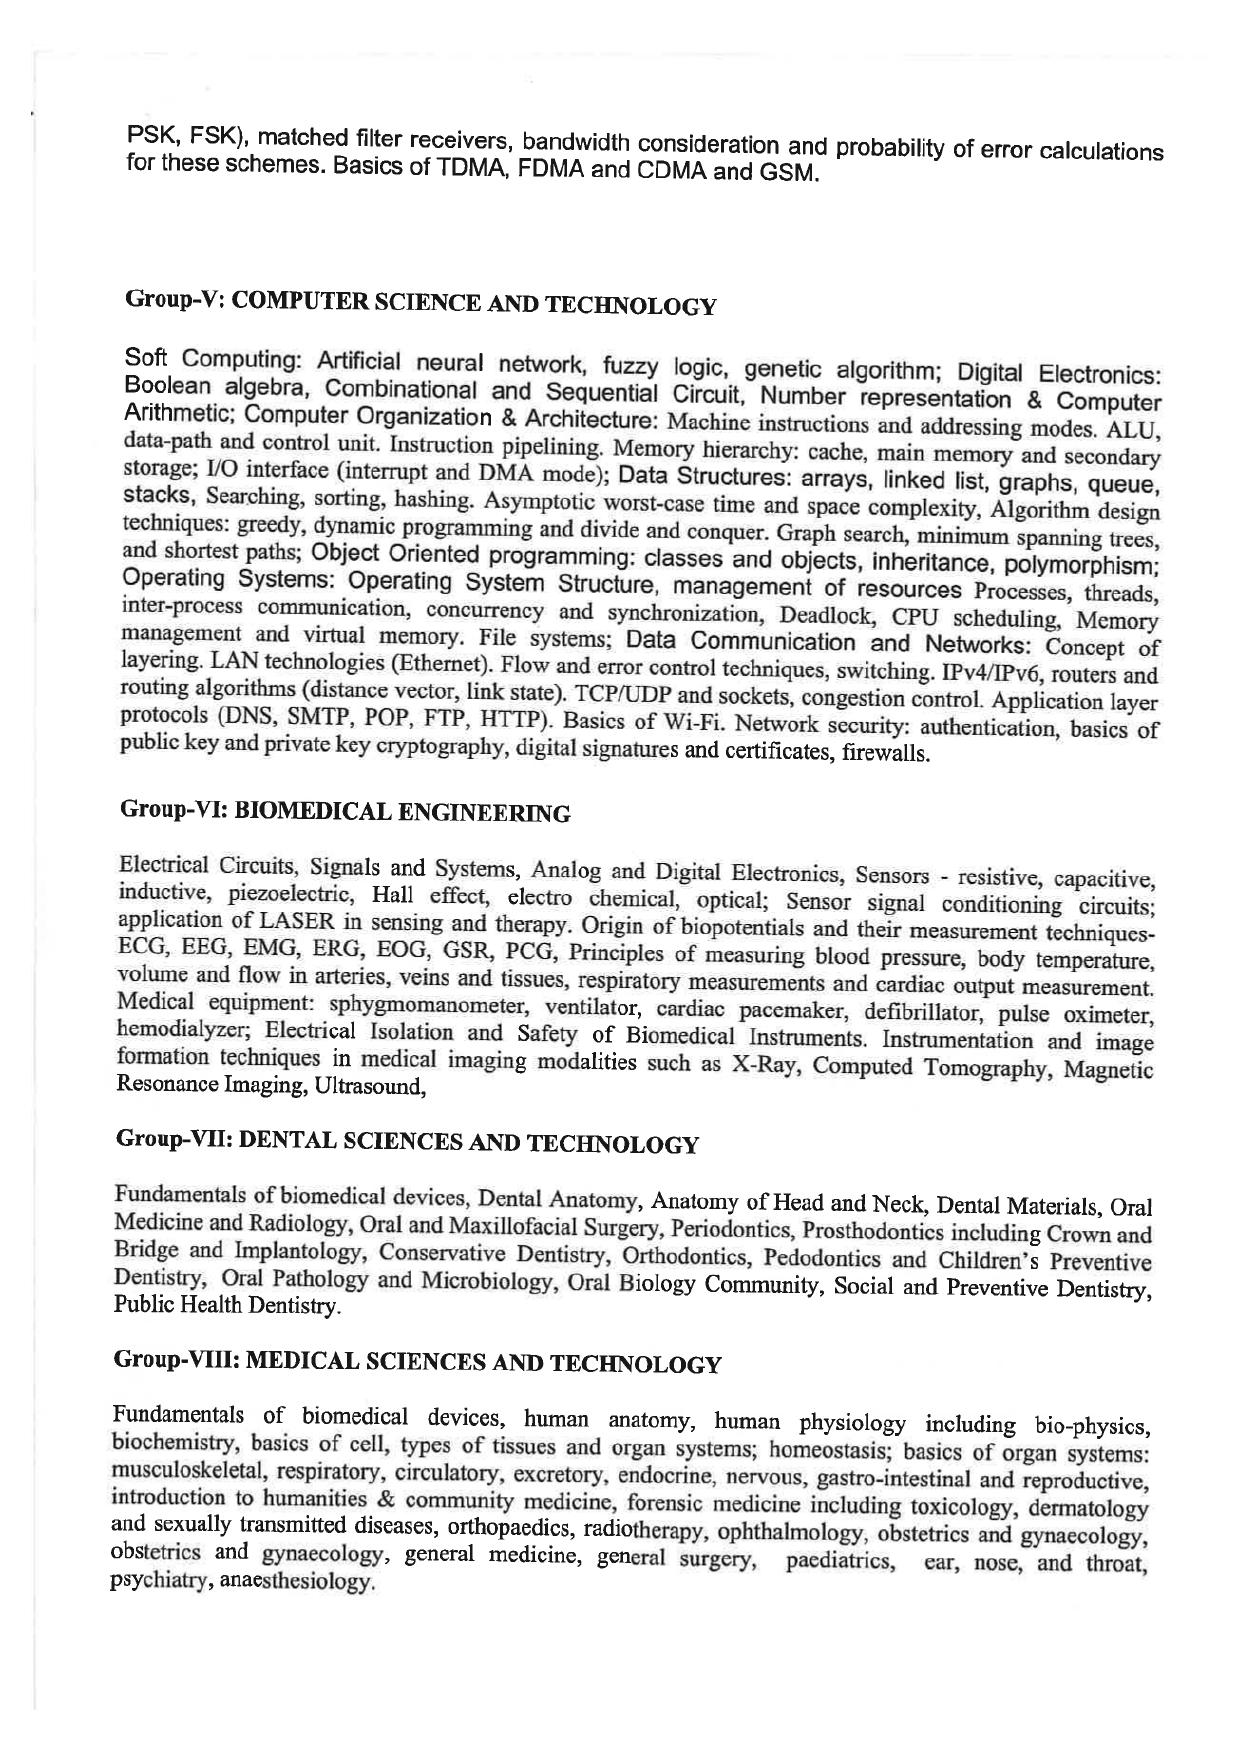 JMI Entrance Exam FACULTY OF ENGINEERING & TECHNOLOGY Syllabus - Page 24